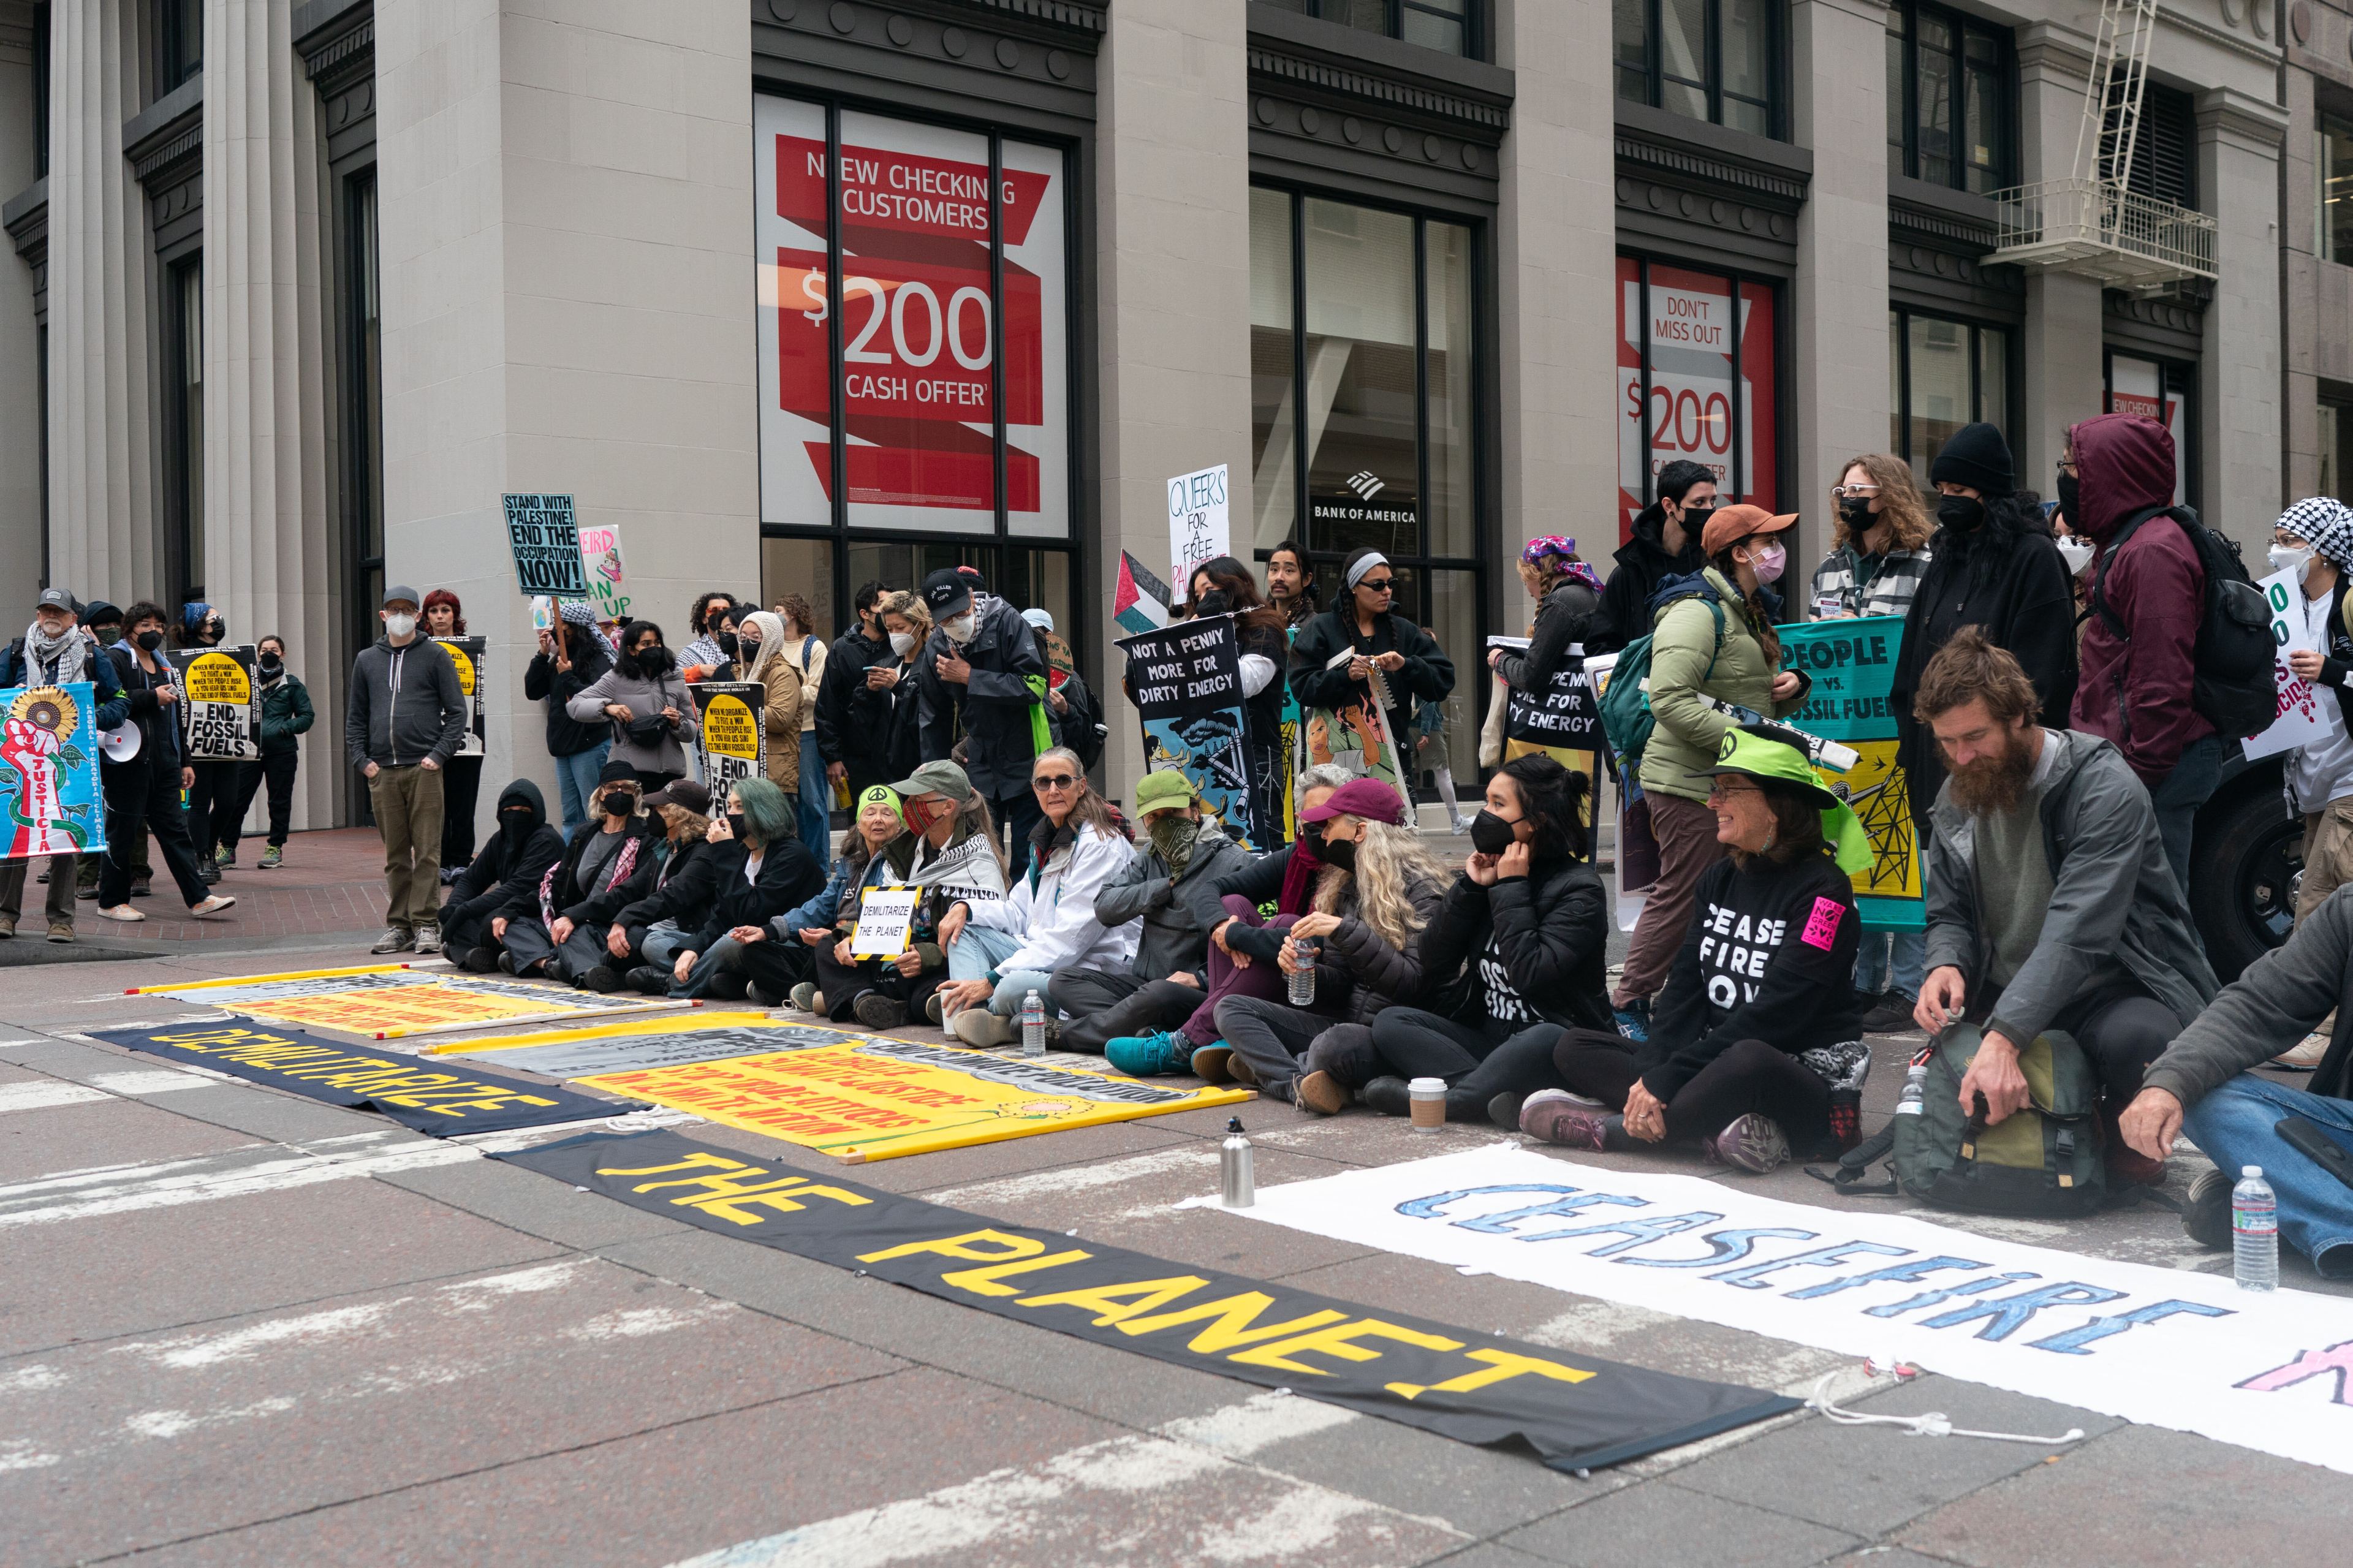 A long line of protesters side on the street blocking traffic with a &quot;Demilitarize the planet&quot;banner on the ground.